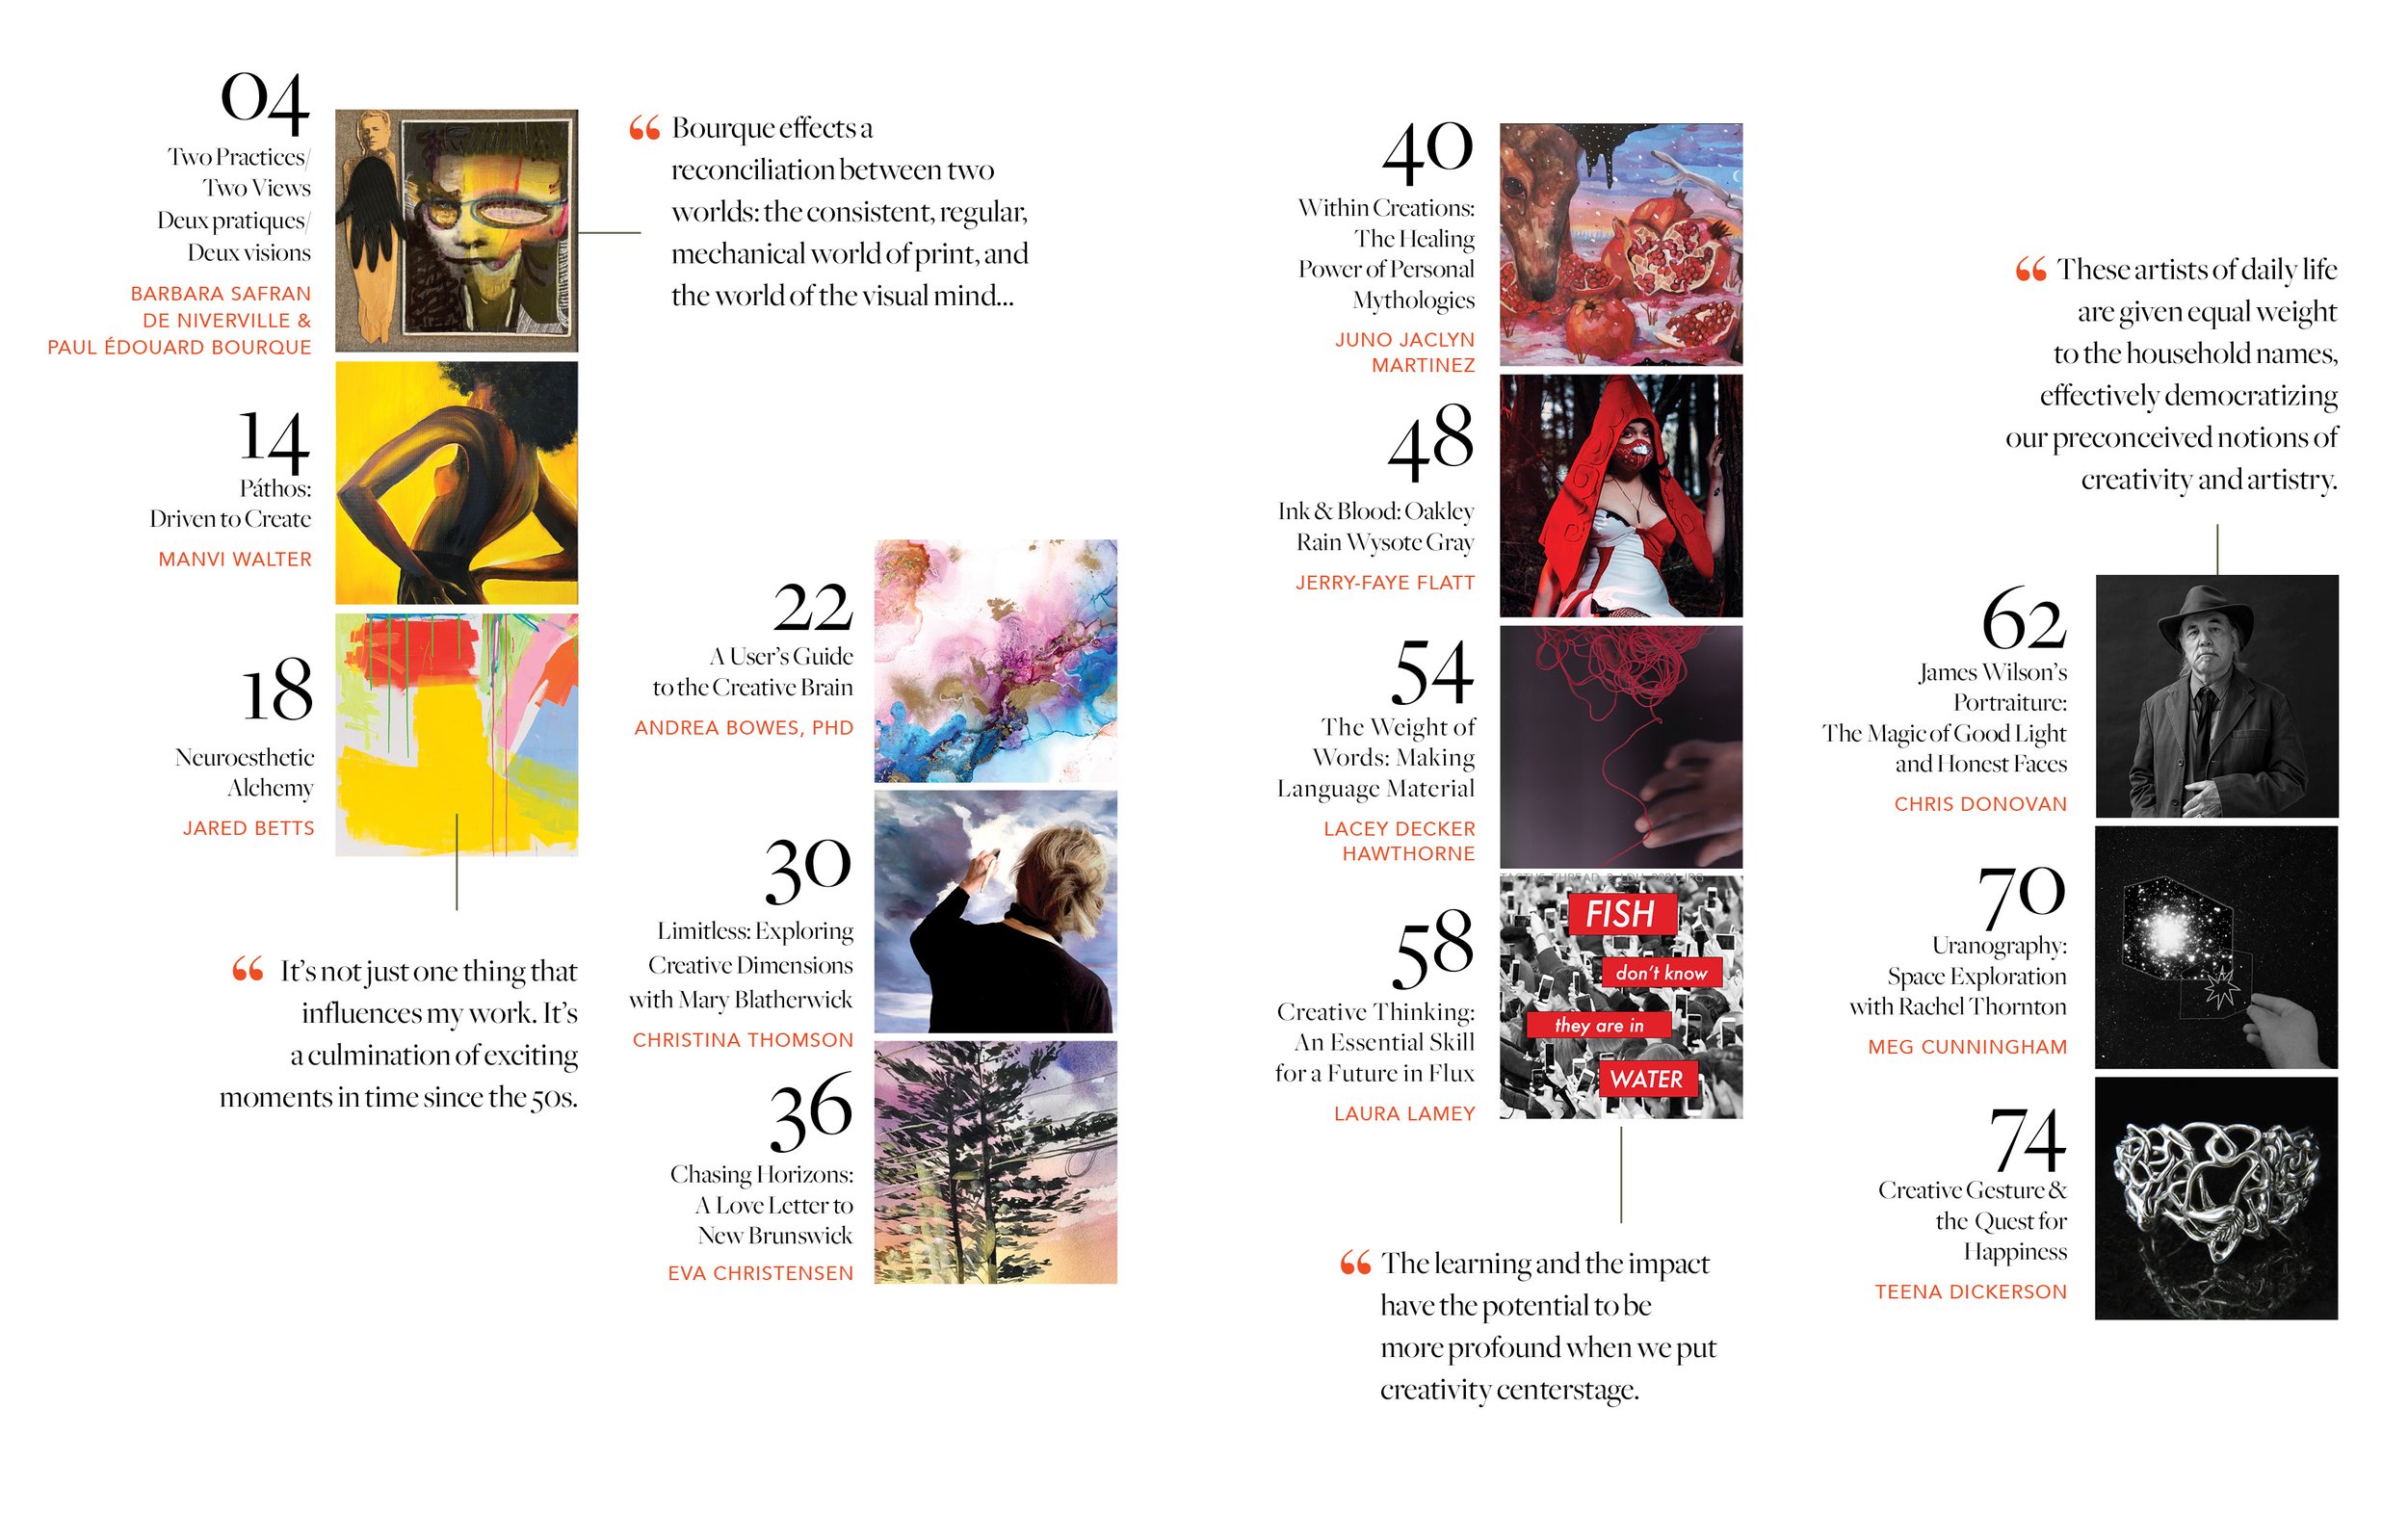 CreatedHere Issue 17 Table of Contents.jpg